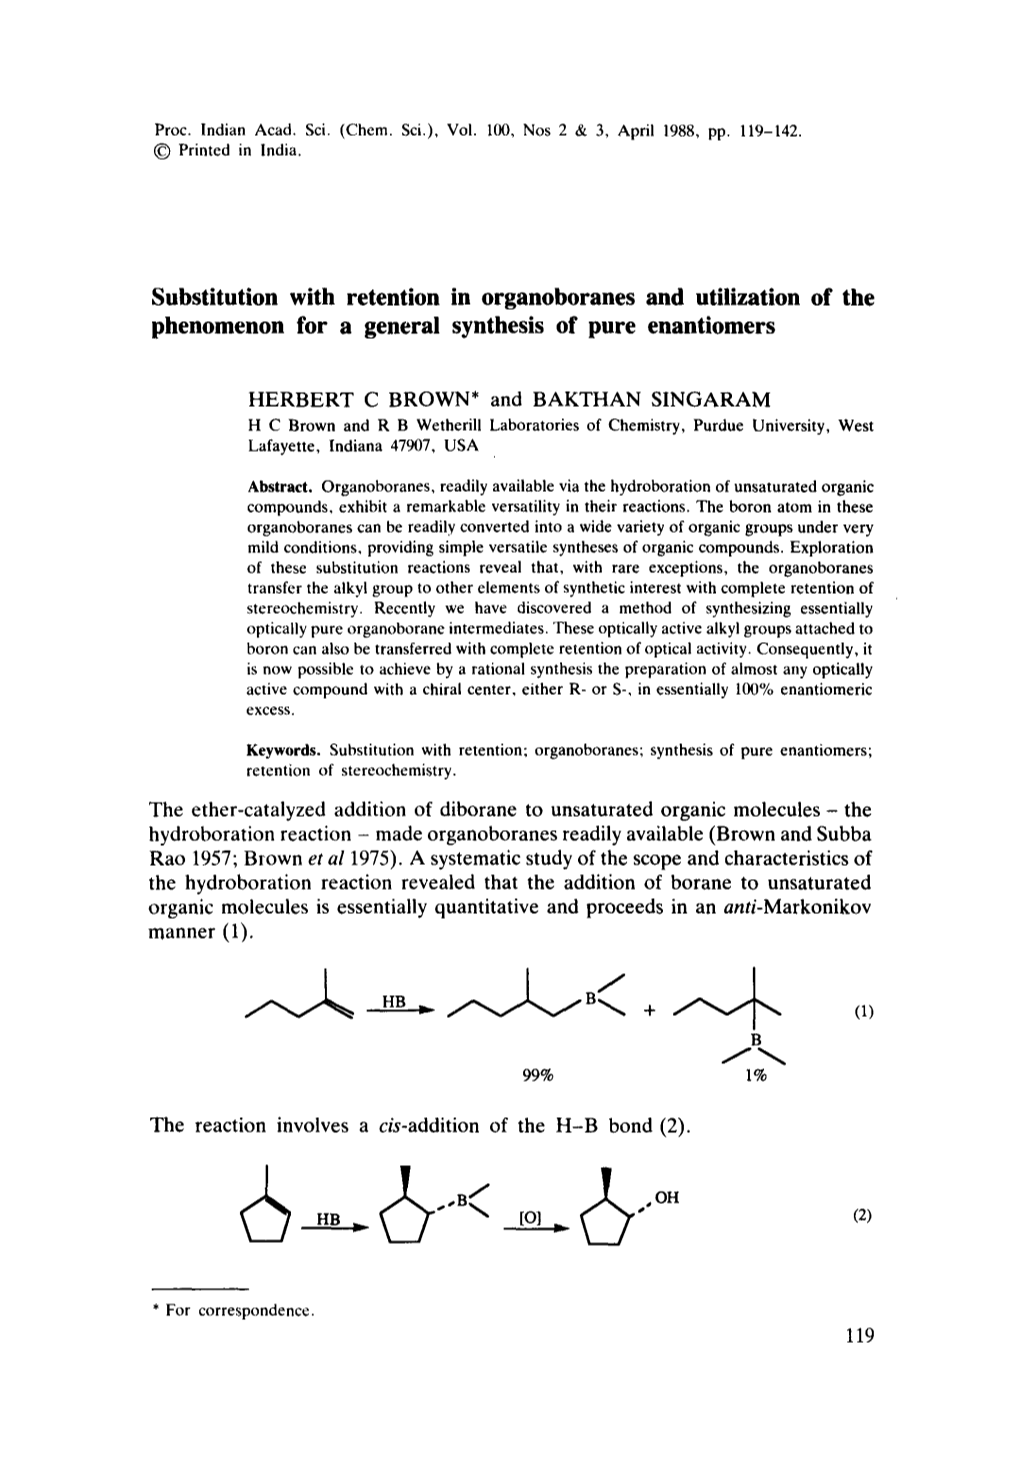 Substitution with Retention in Organoboranes and Utilization of the Phenomenon for a General Synthesis of Pure Enantiomers